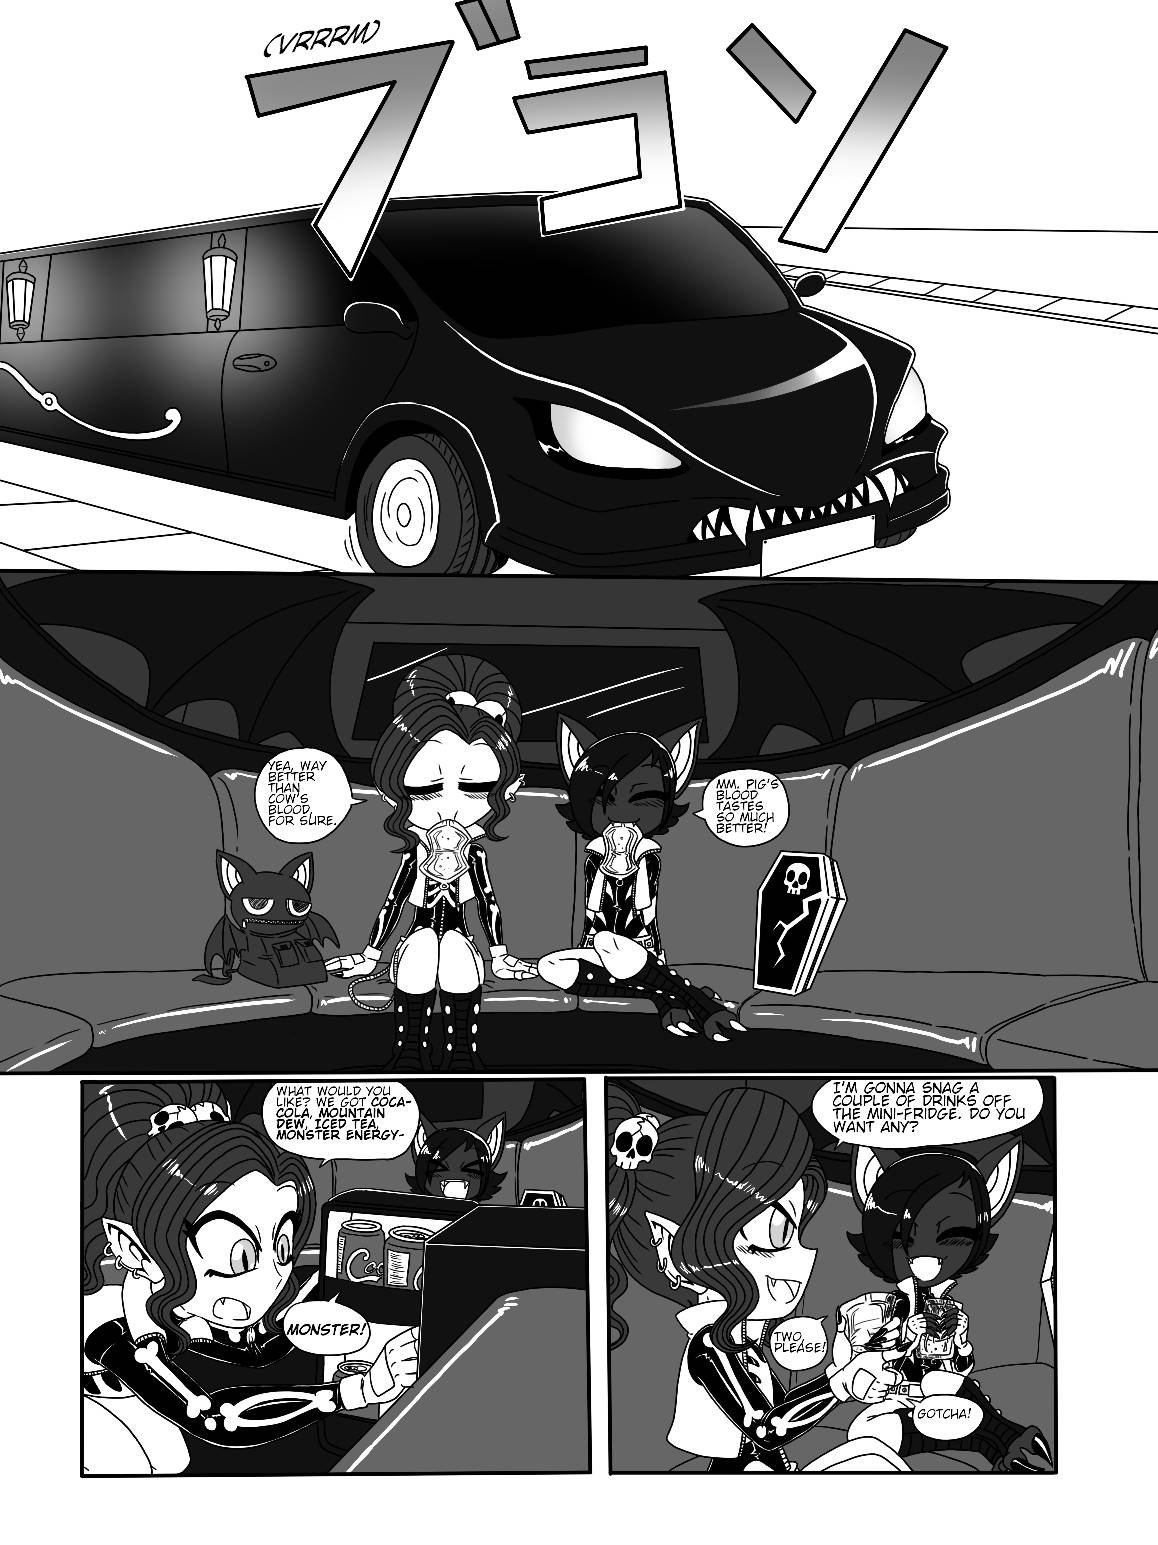 Back to School - Chapter 1 - Page 3 by PlayboyVampire on DeviantArt